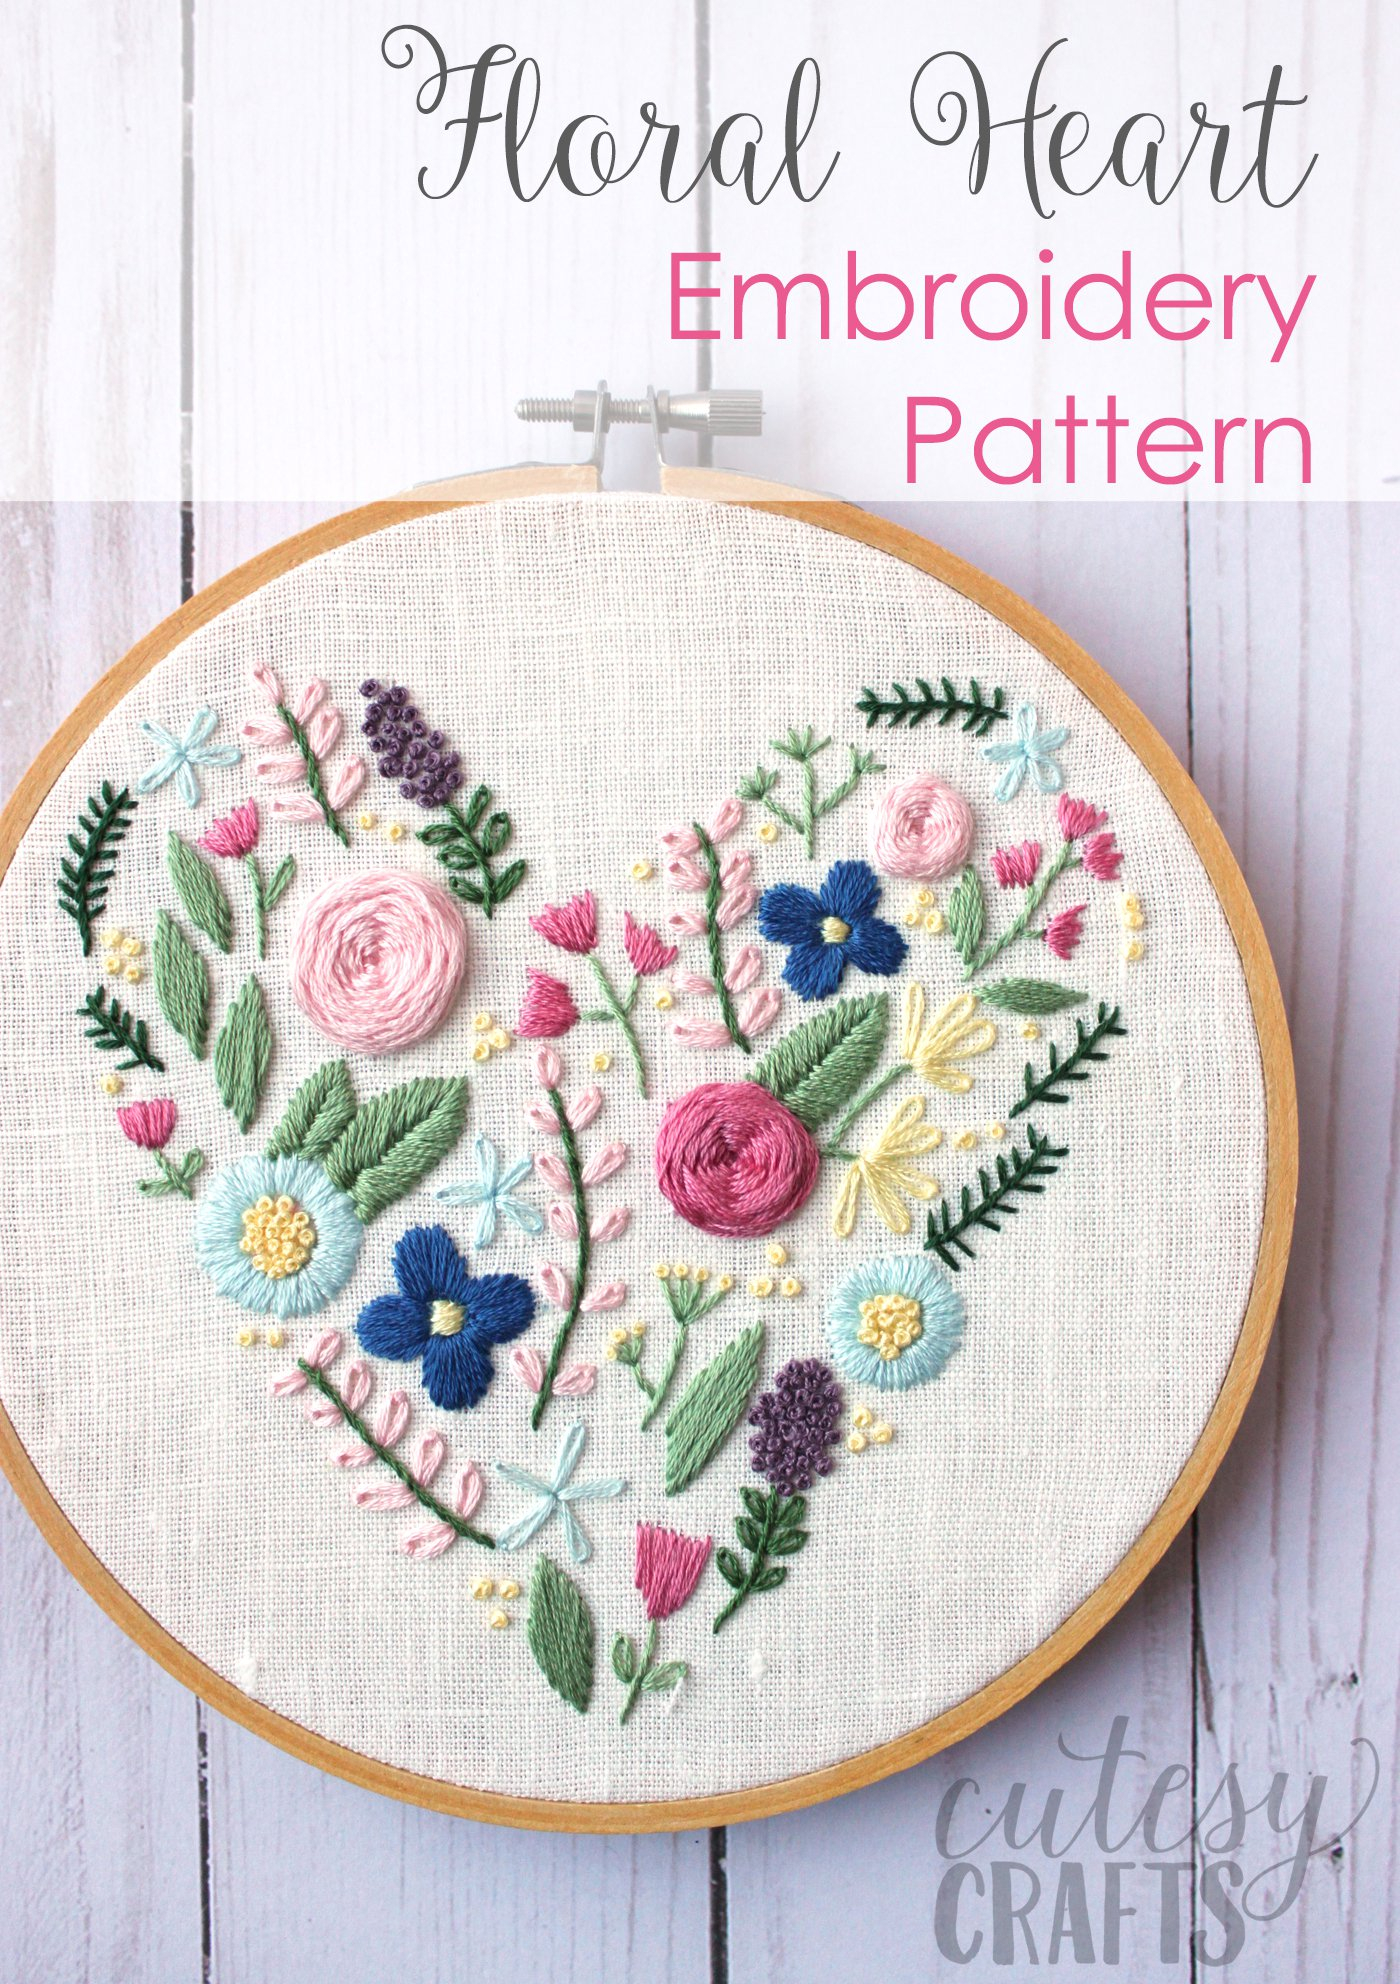 Embroidery Free Patterns Floral Heart Hand Embroidery Pattern The Polka Dot Chair